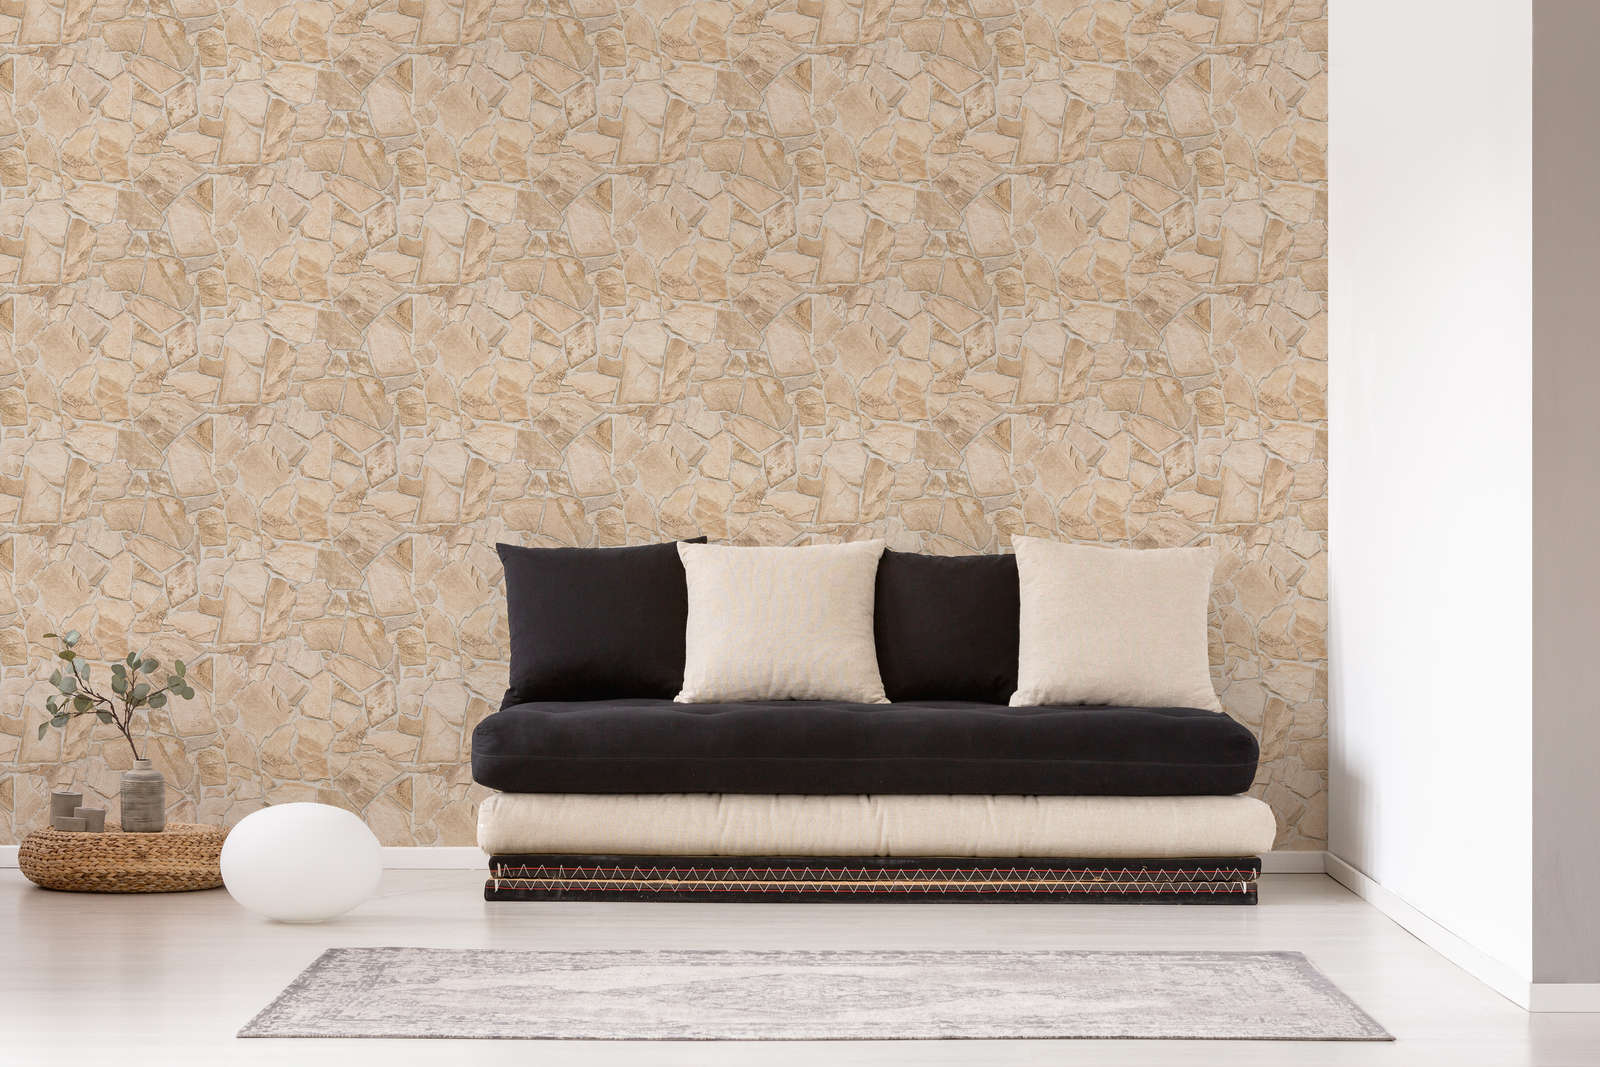             Stone Wall Wallpaper with 3D Optics - Beige, Brown
        